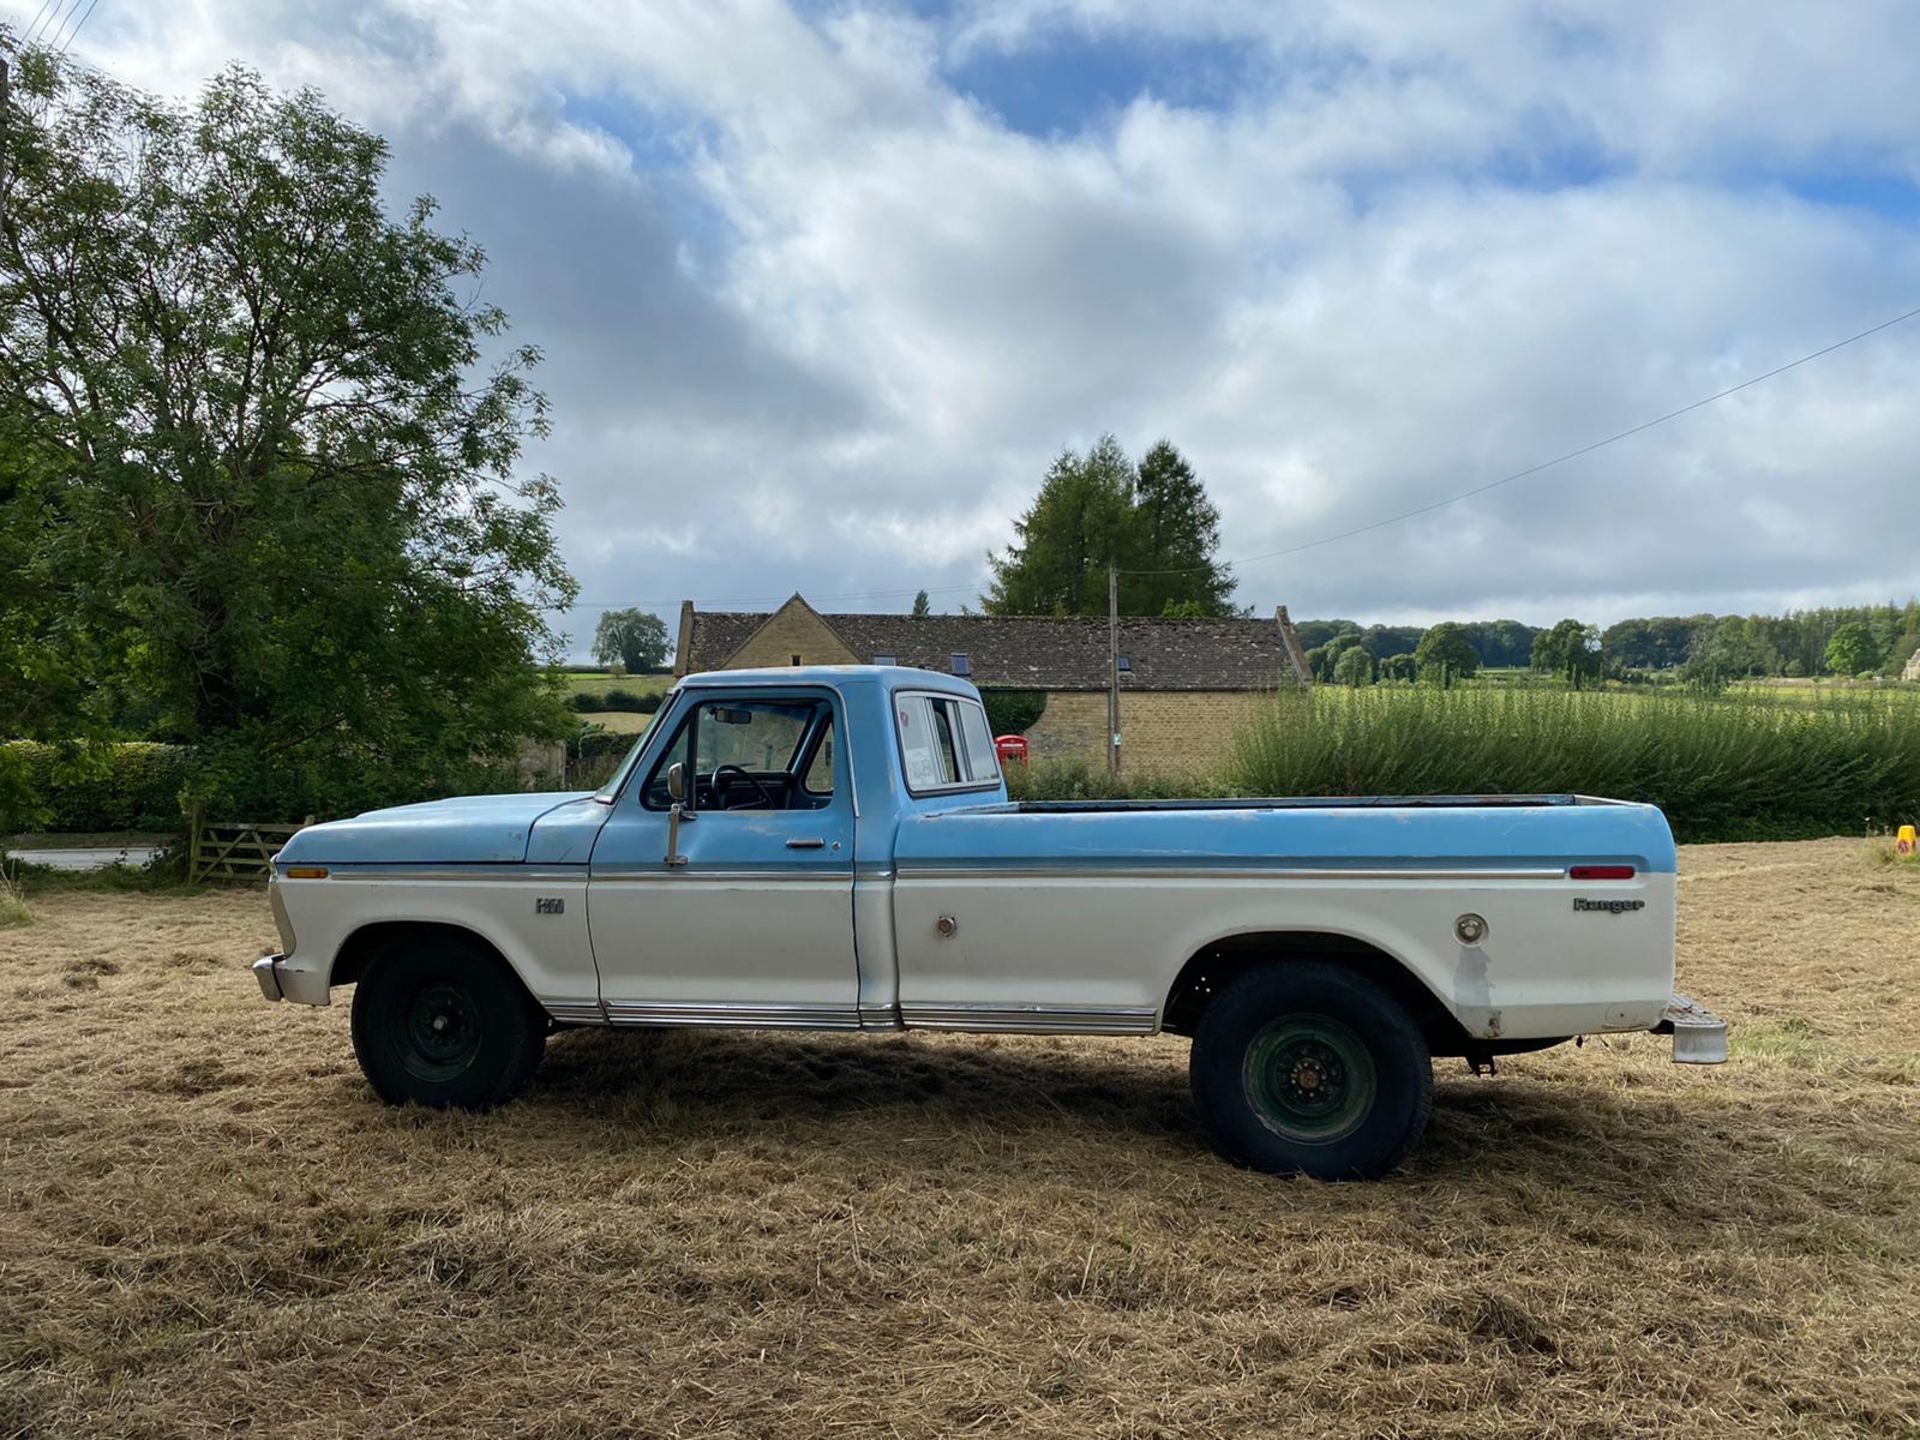 1975 FORD F-250 6.4 (390) V8, 4 SPEED MANUAL, HAS JUST BEEN REGISTERED, NEW BENCH SEAT *NO VAT* - Image 11 of 22